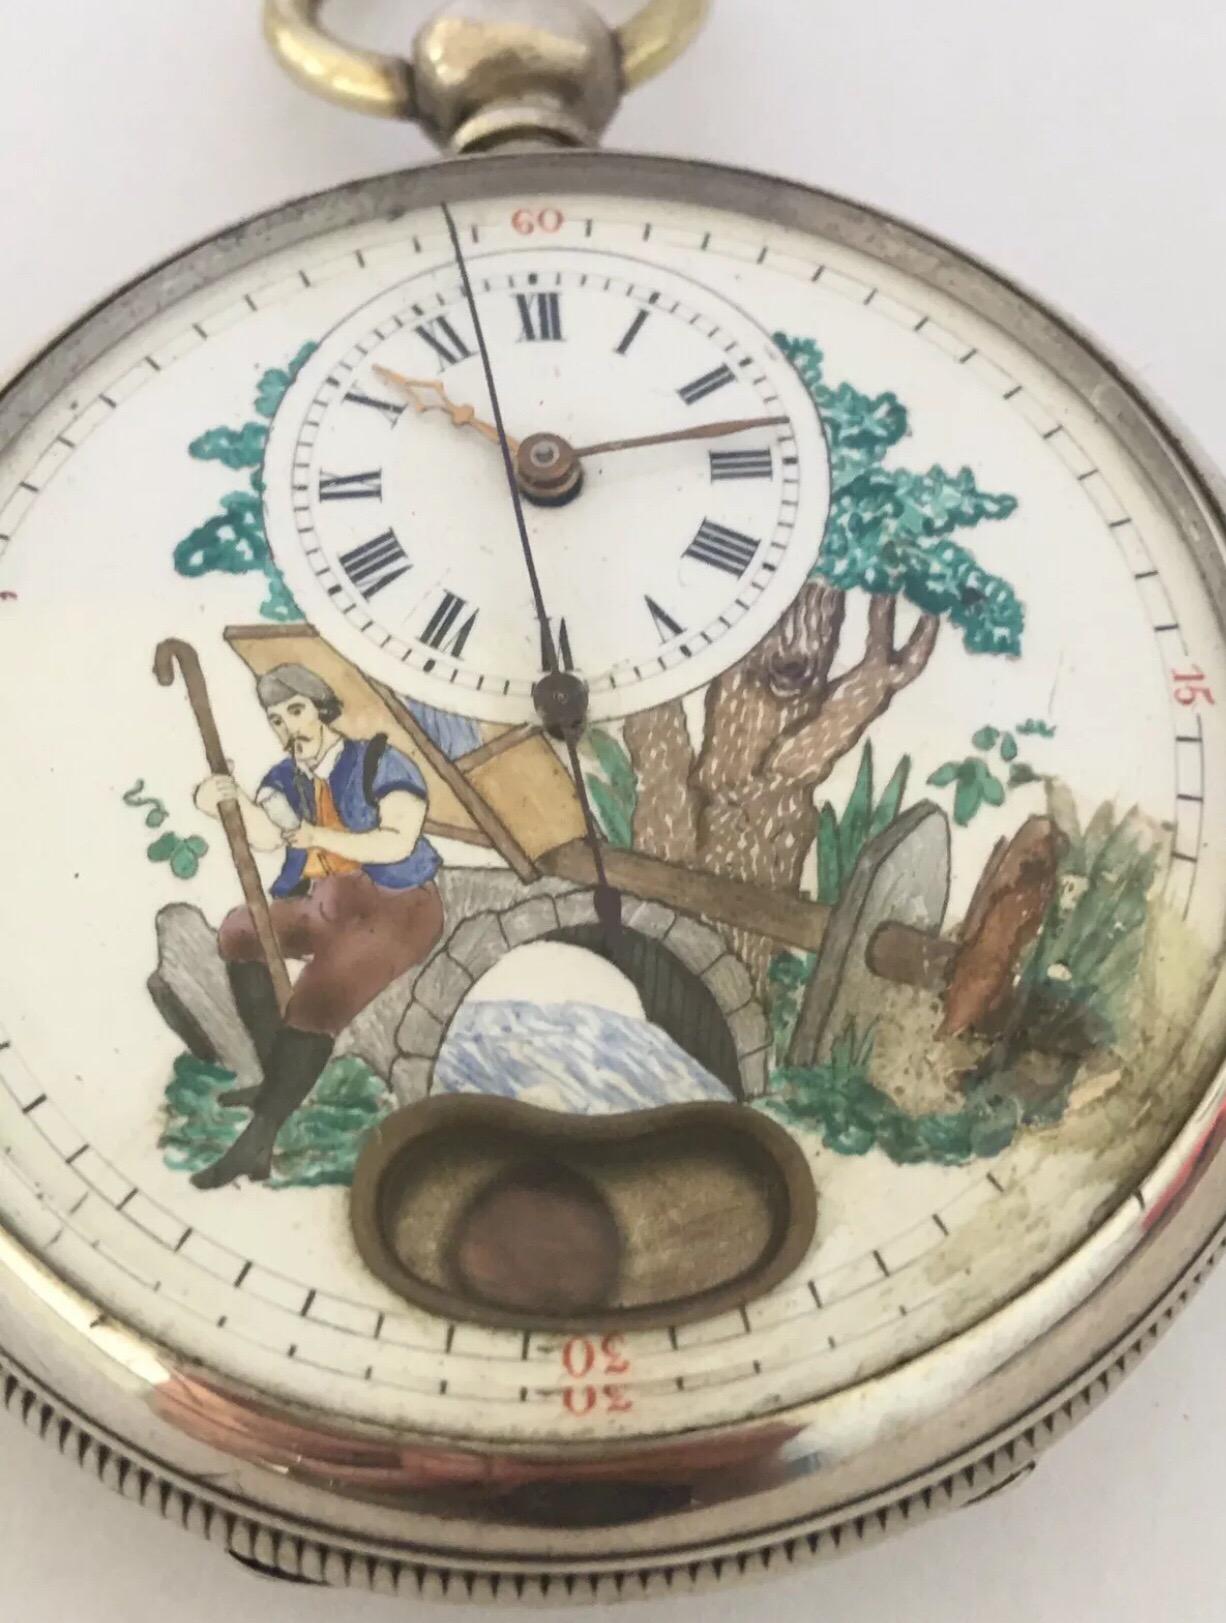 A very beautifully swiss made silver pocket watch. This late 19th century swiss silver pocket watch has a swift second hand and a mock pendulum aperture with a lovely hand painted enamel dial of a man in the country side. the watch has a spring